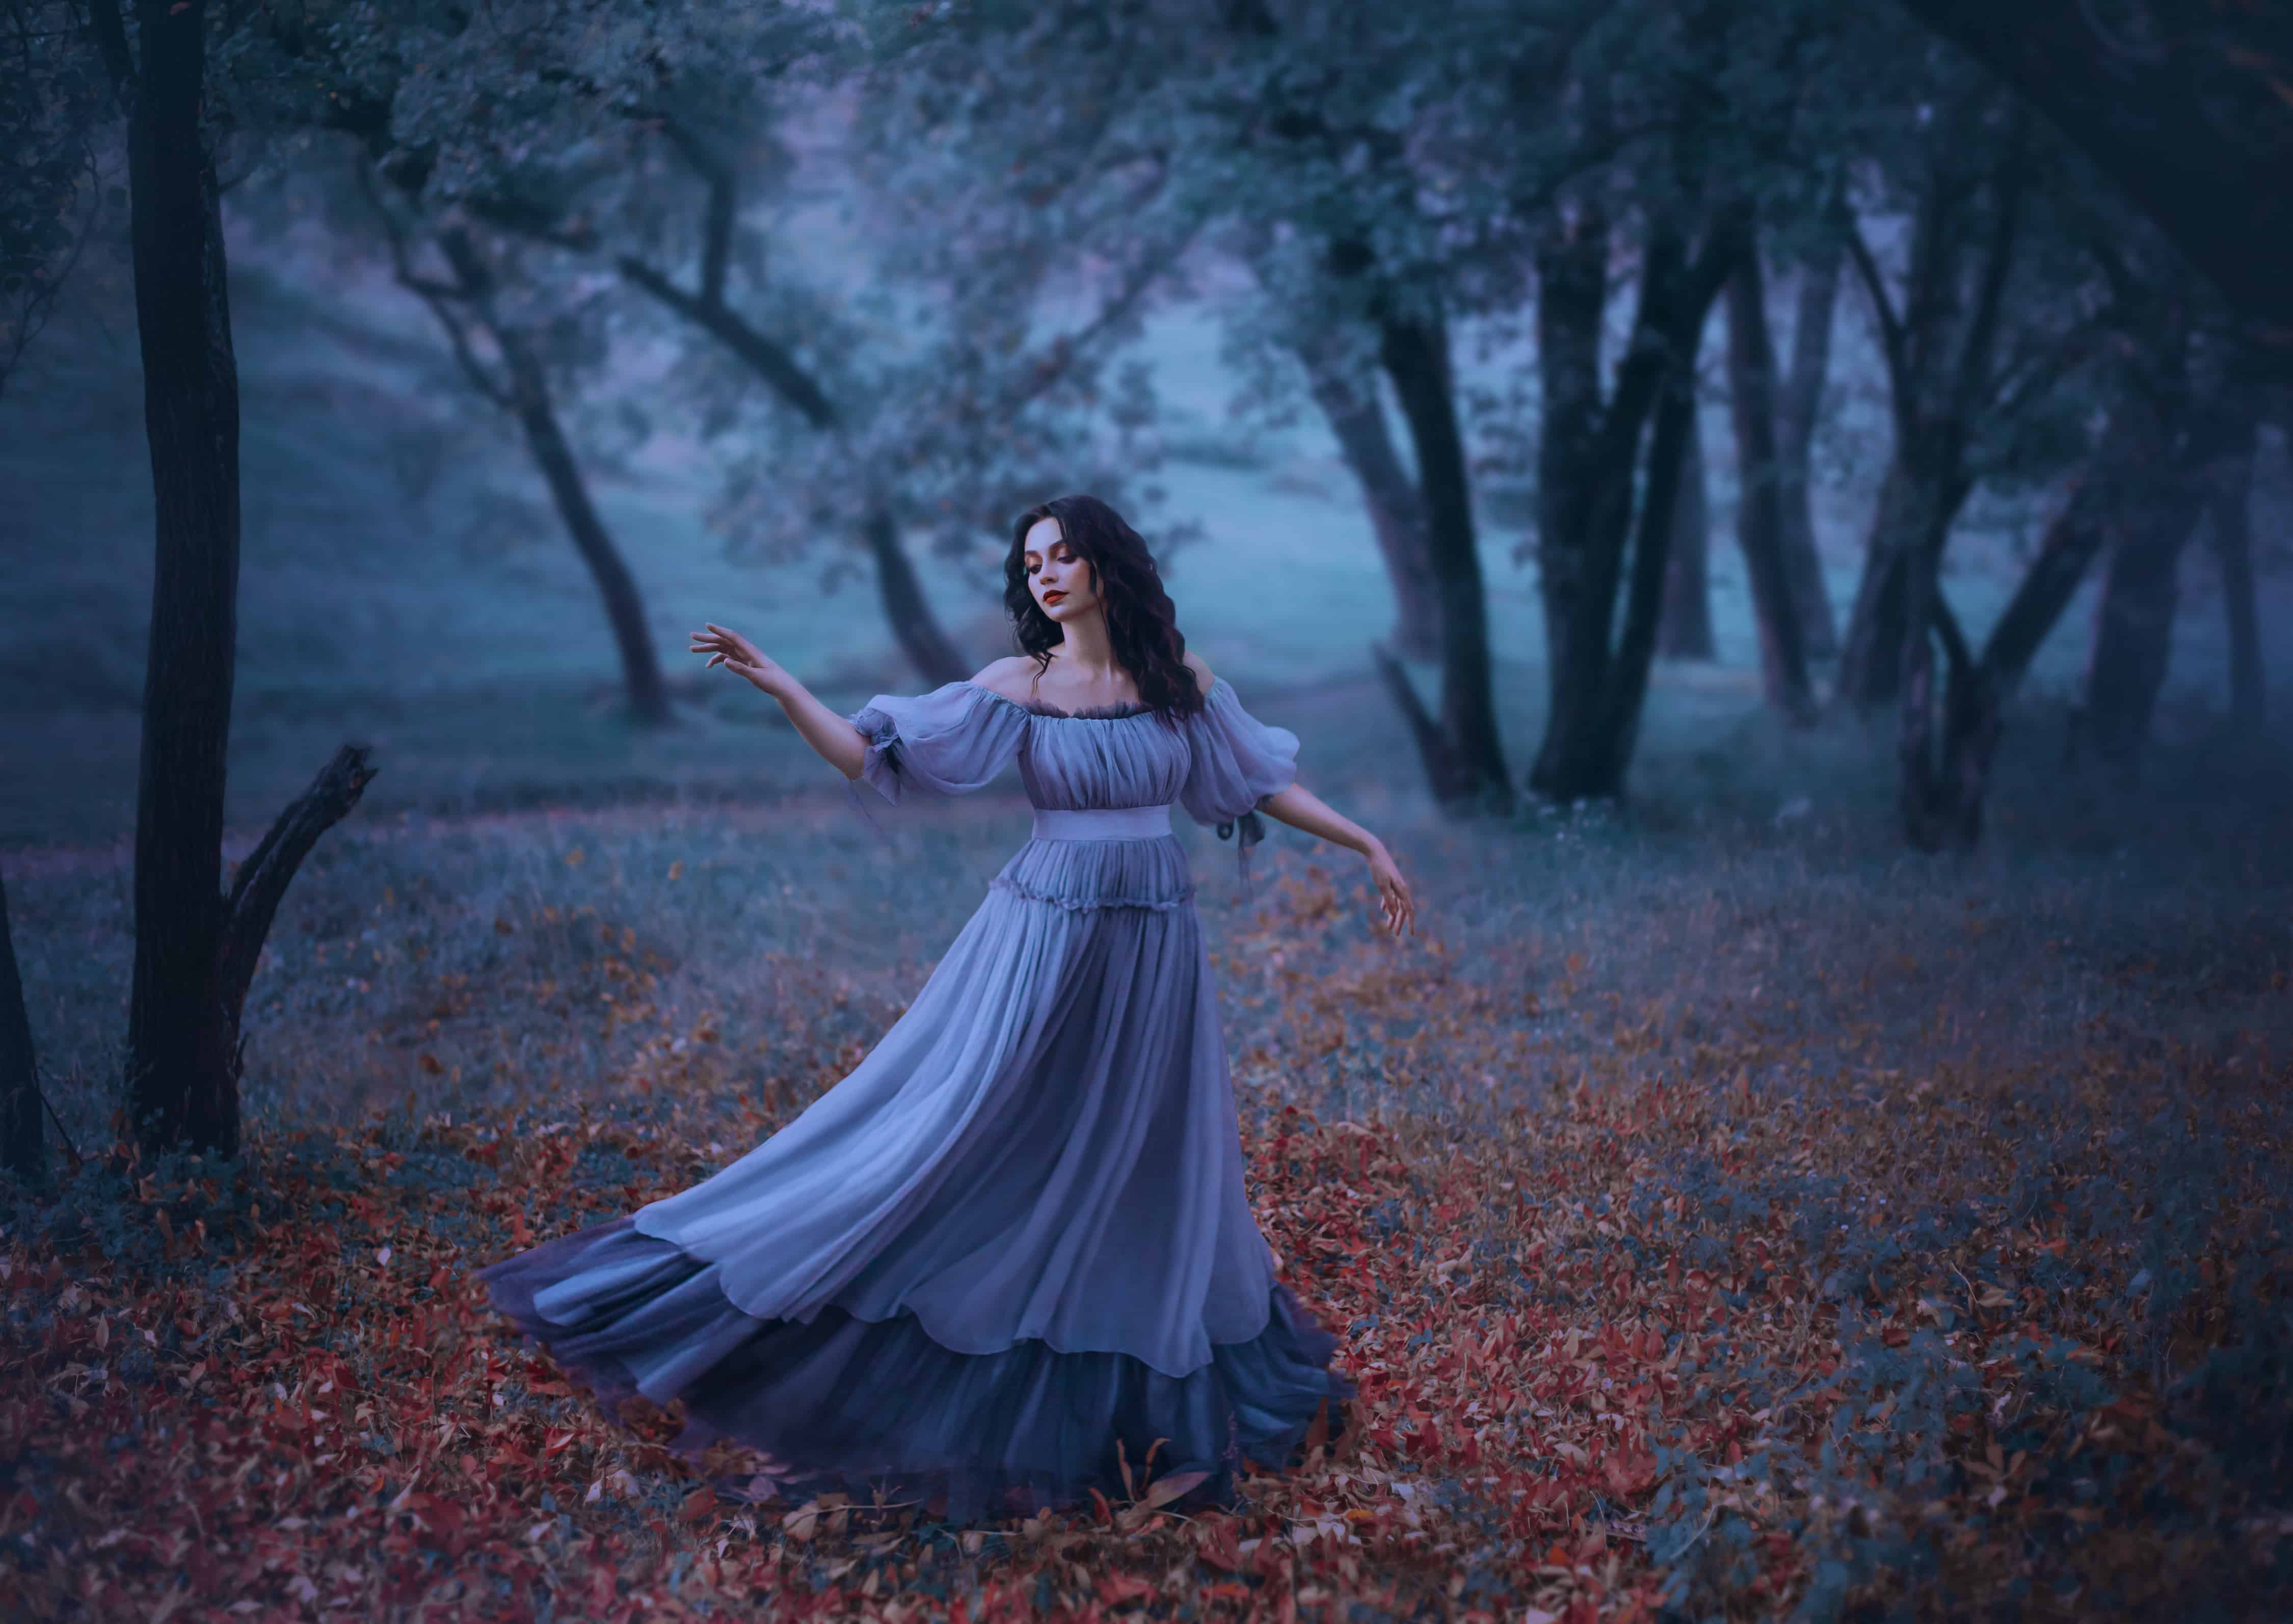 a mysterious girl with wavy dark hair is dancing alone on fallen autumn leaves in a gloomy night forest in a long wonderful blue vintage dress, fabulous heroine, knows no ills, the legend of Pandora